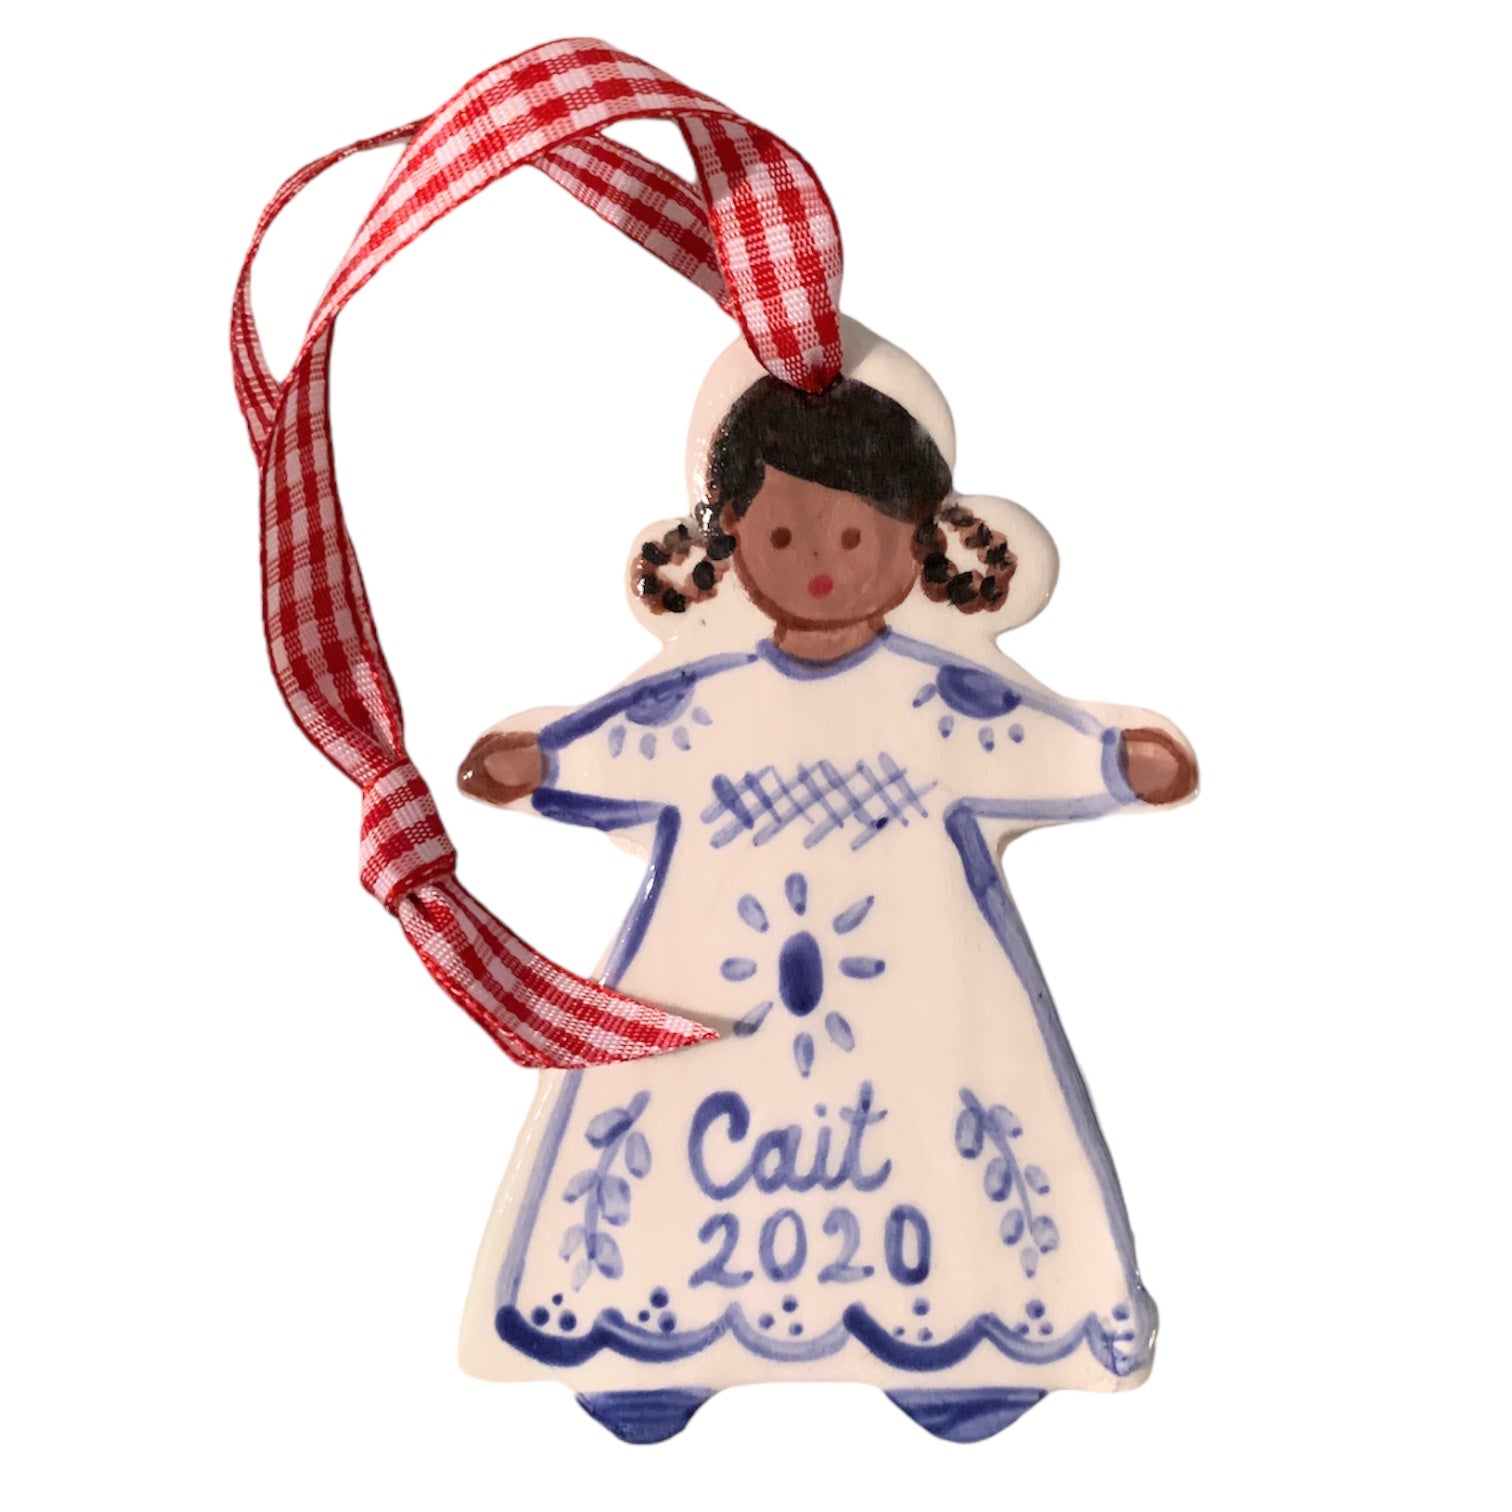 Christmas Ornament - Blue Dress Girl - Premium  from Tricia Lowenfield Design 